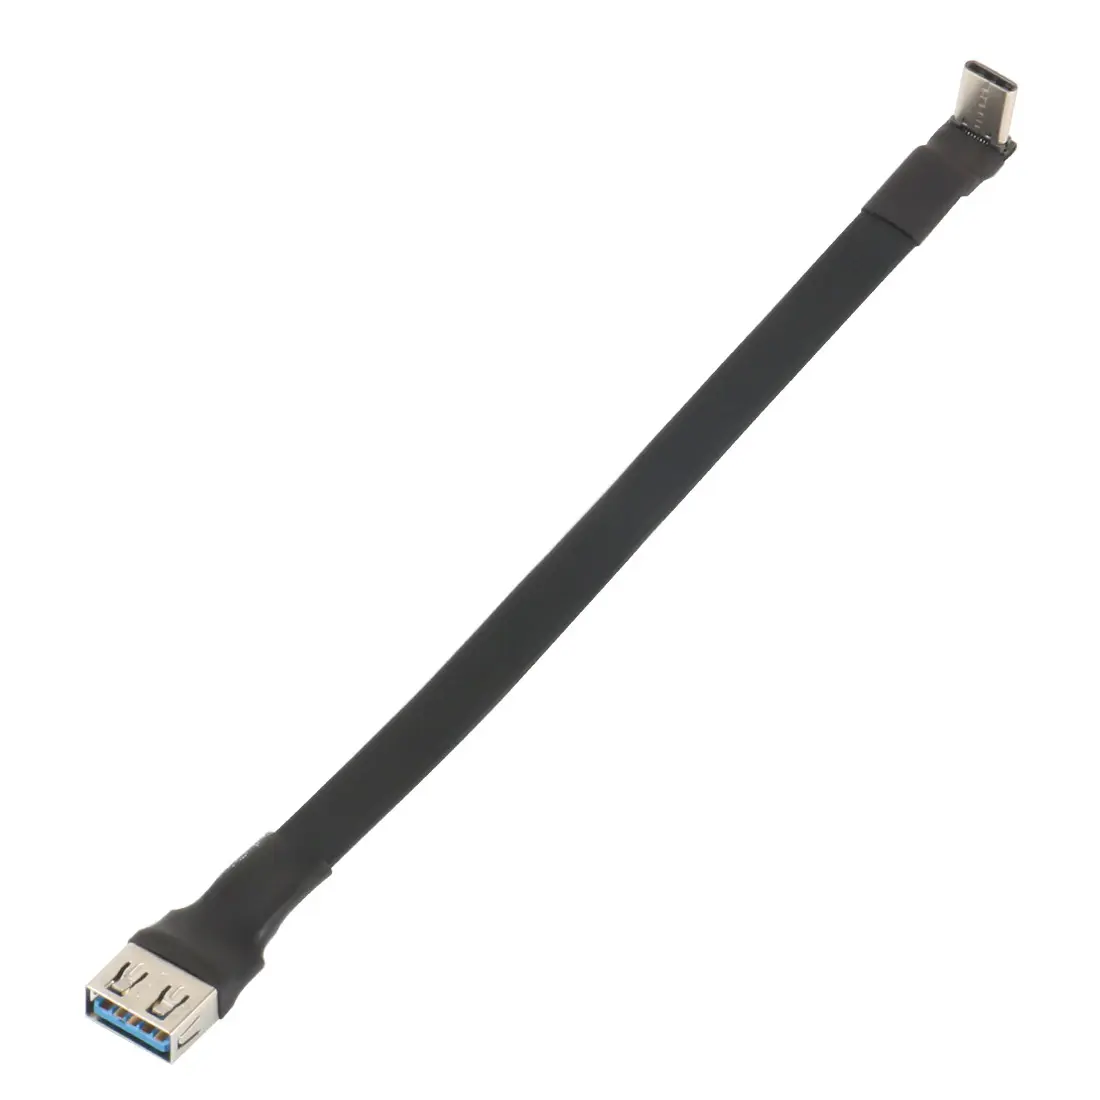 USB 3.0 Type-A Male to USB3.1 Type-C Male Up/Down Angle USB Data Sync Cable Type-C Connector FPC FPV Flat Cord Adapter Cable